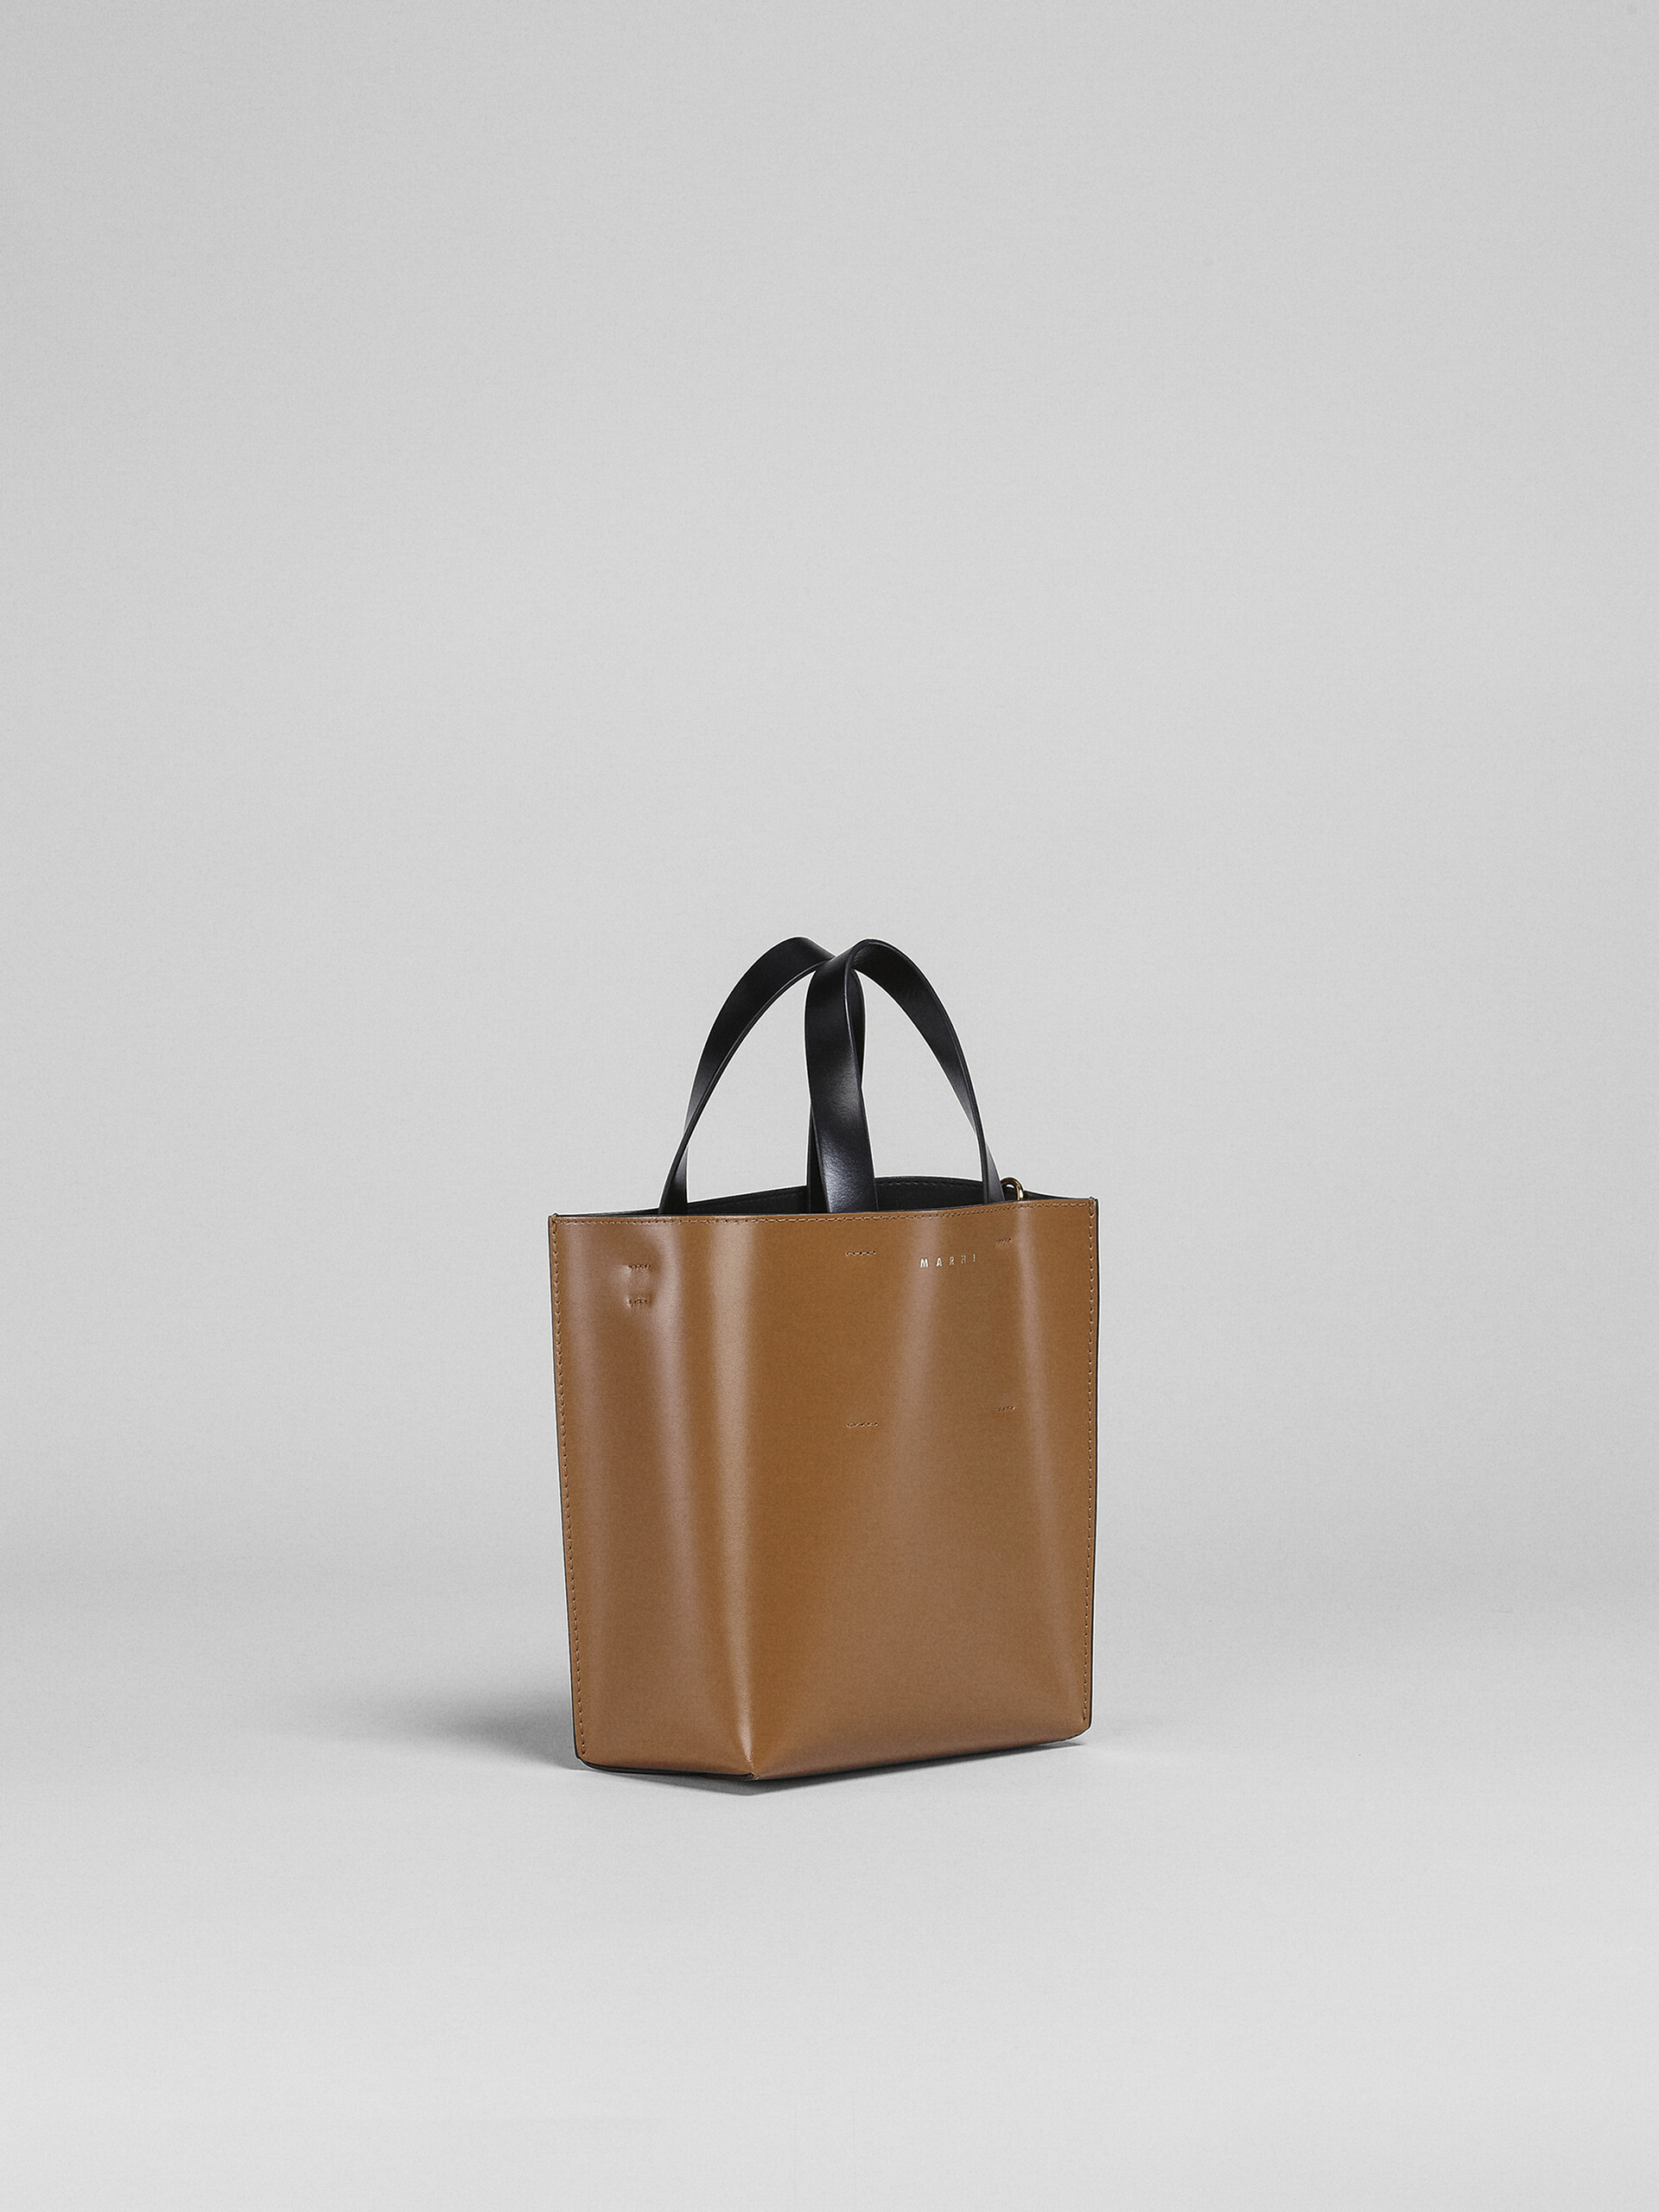 MUSEO mini bag in brown and black leather - Shopping Bags - Image 6